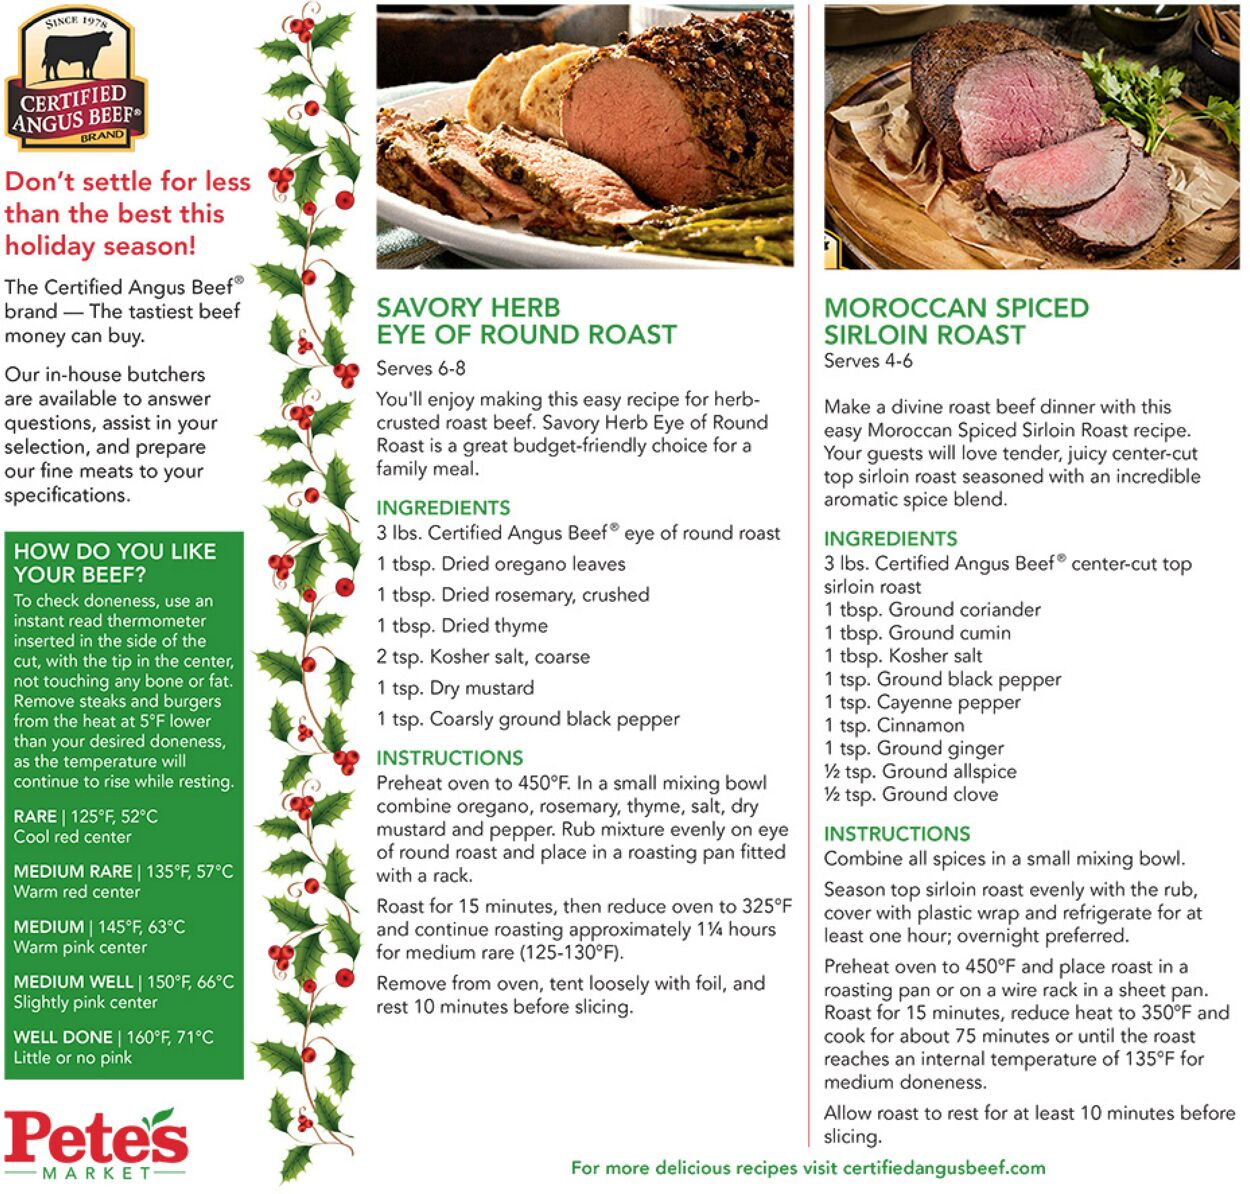 Weekly ad Pete's Fresh Market 11/30/2022 - 12/06/2022